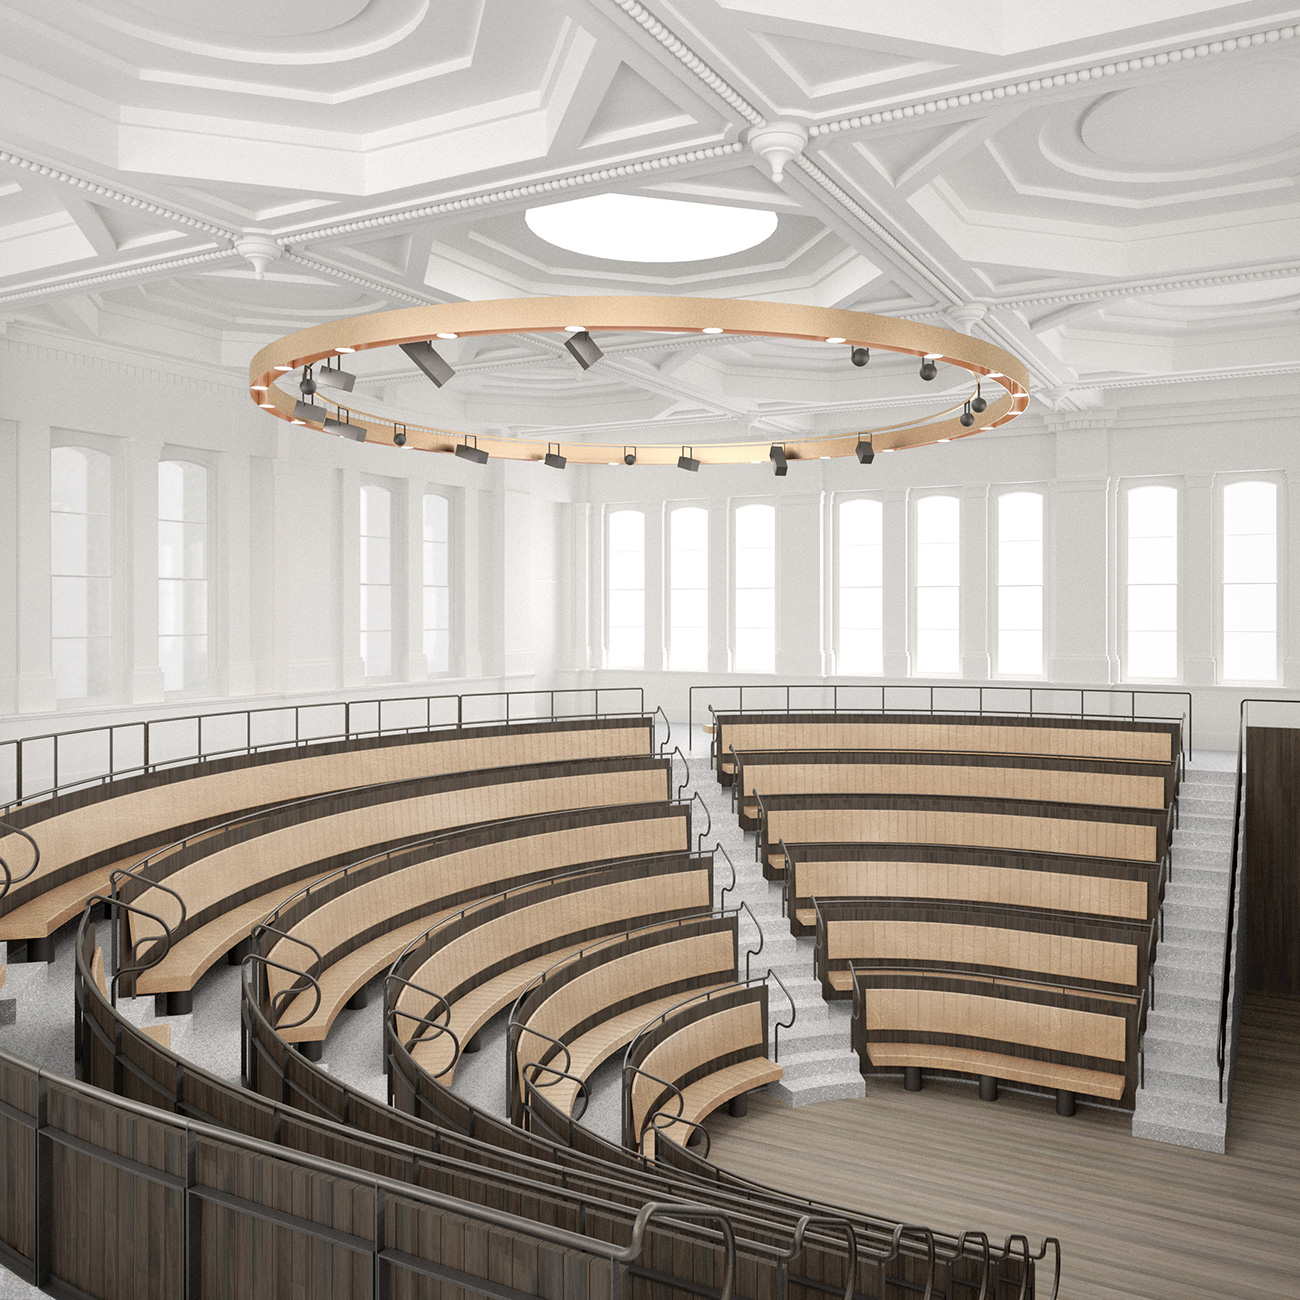 Planned lecture theatre at the Royal Academy of Arts